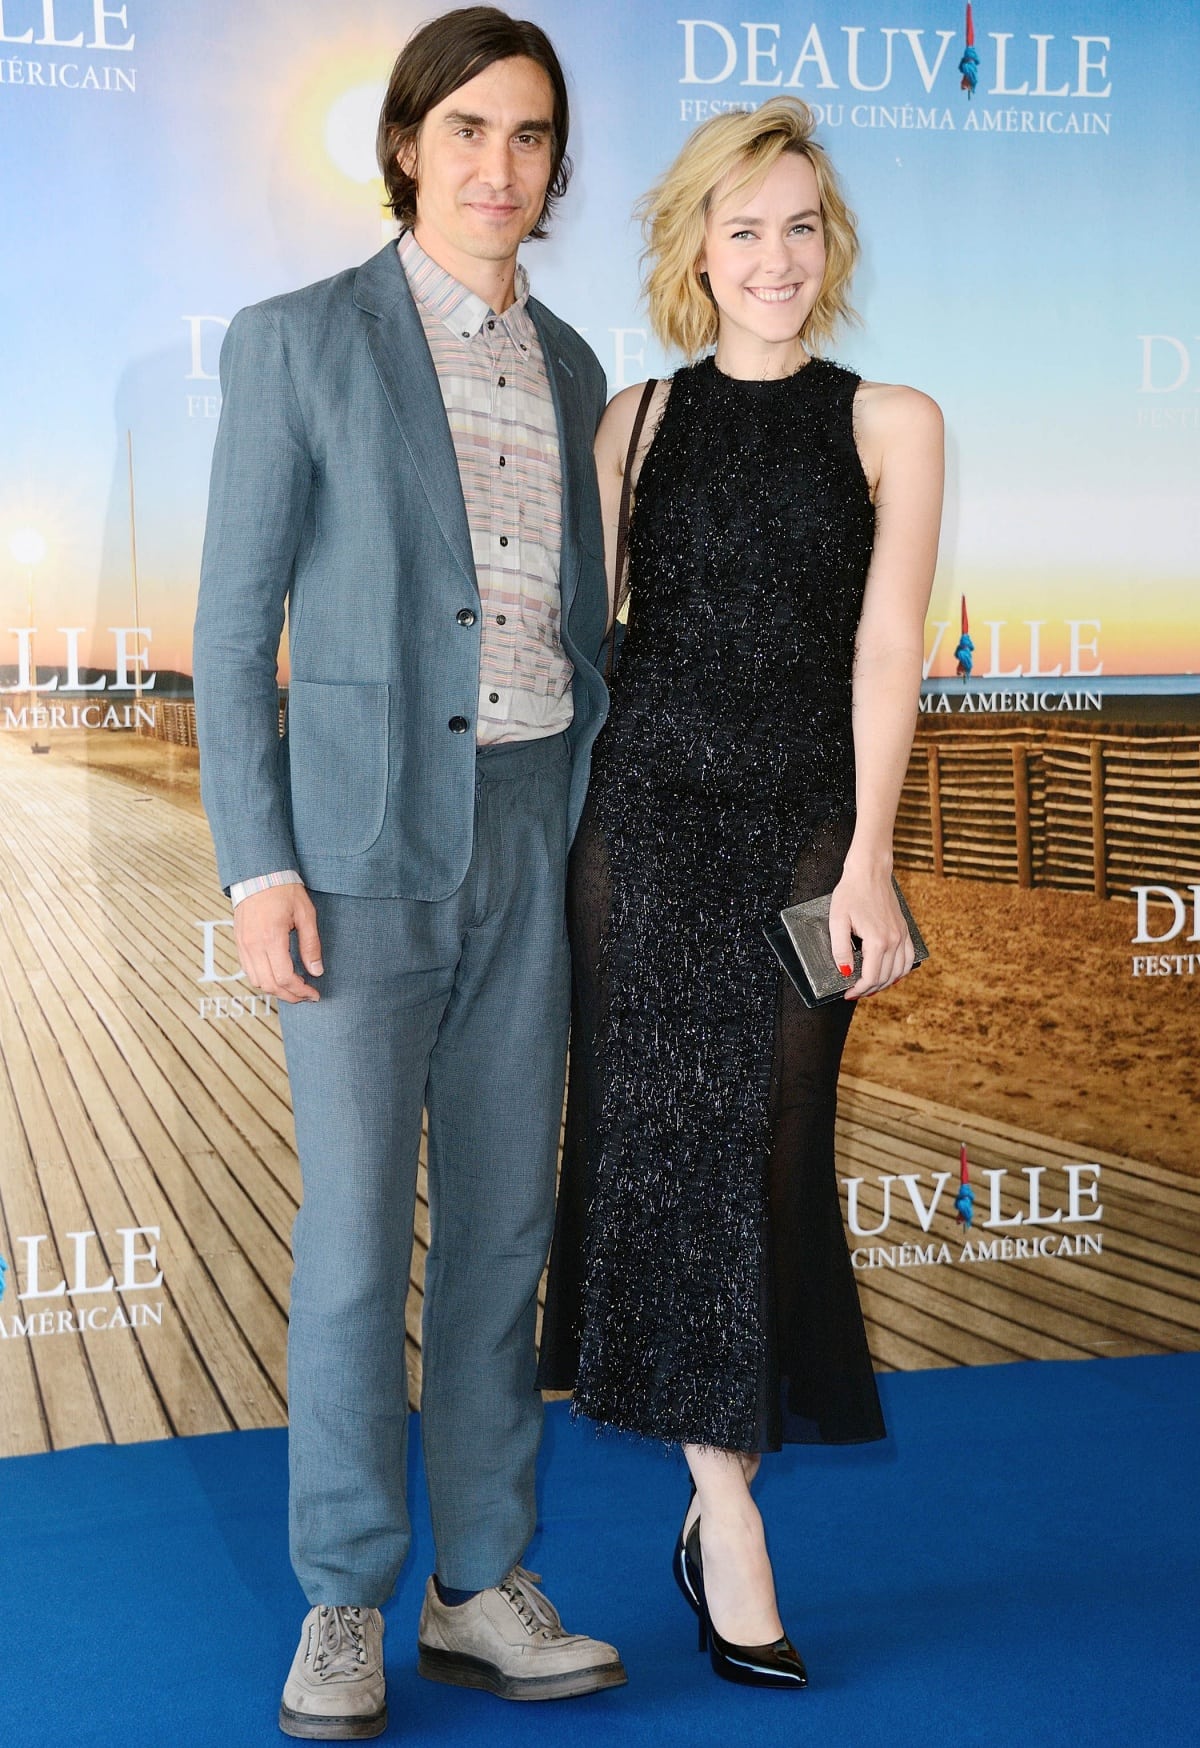 M. Blash and Jena Malone at The Wait photocall during the 39th Deauville American Film Festival